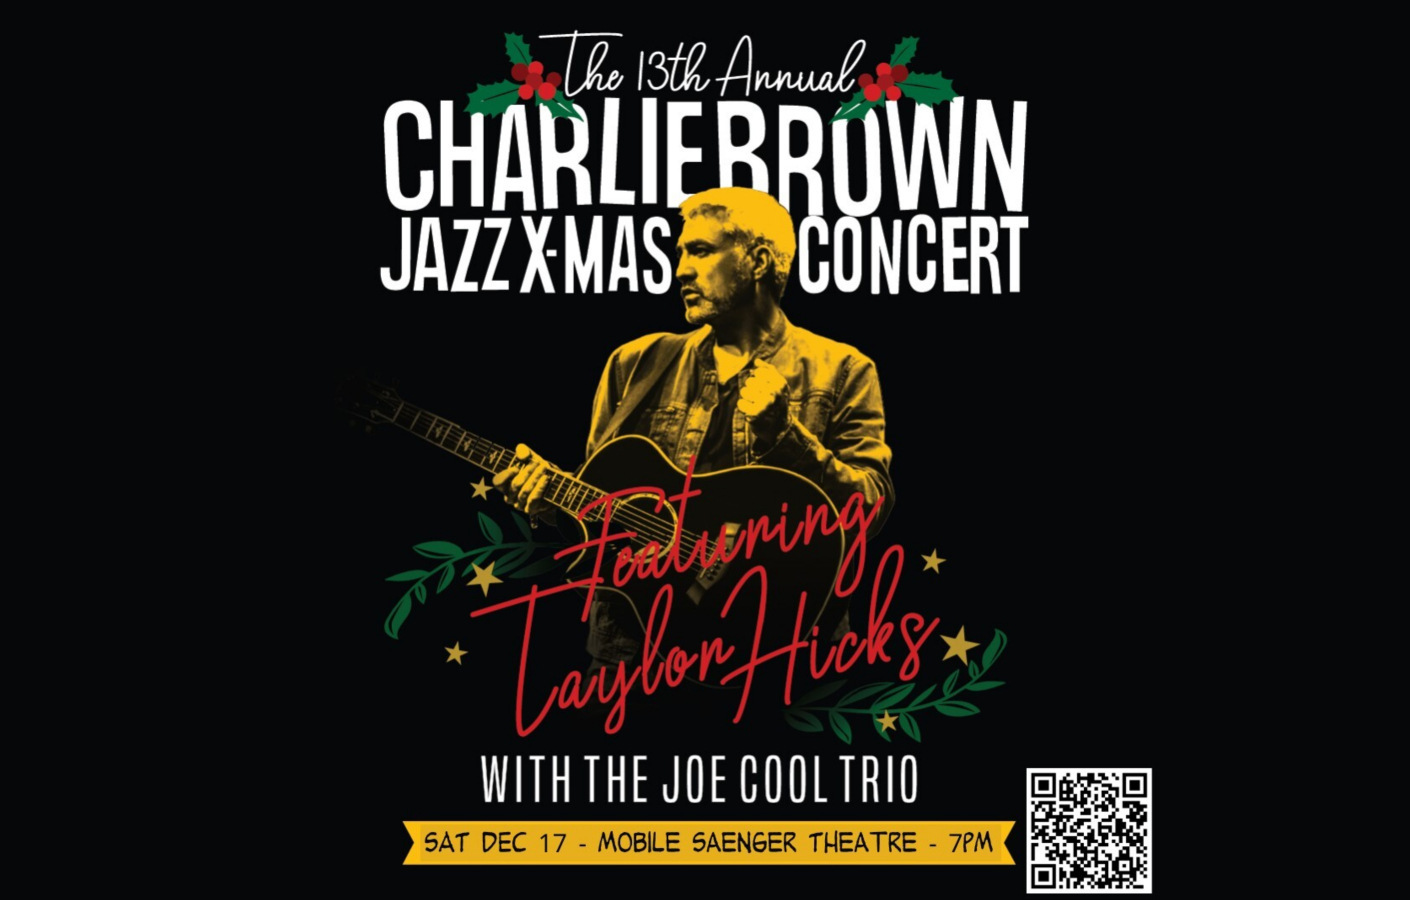 THE 13TH ANNUAL CHARLIE BROWN JAZZ CHRISTMAS CONCERT